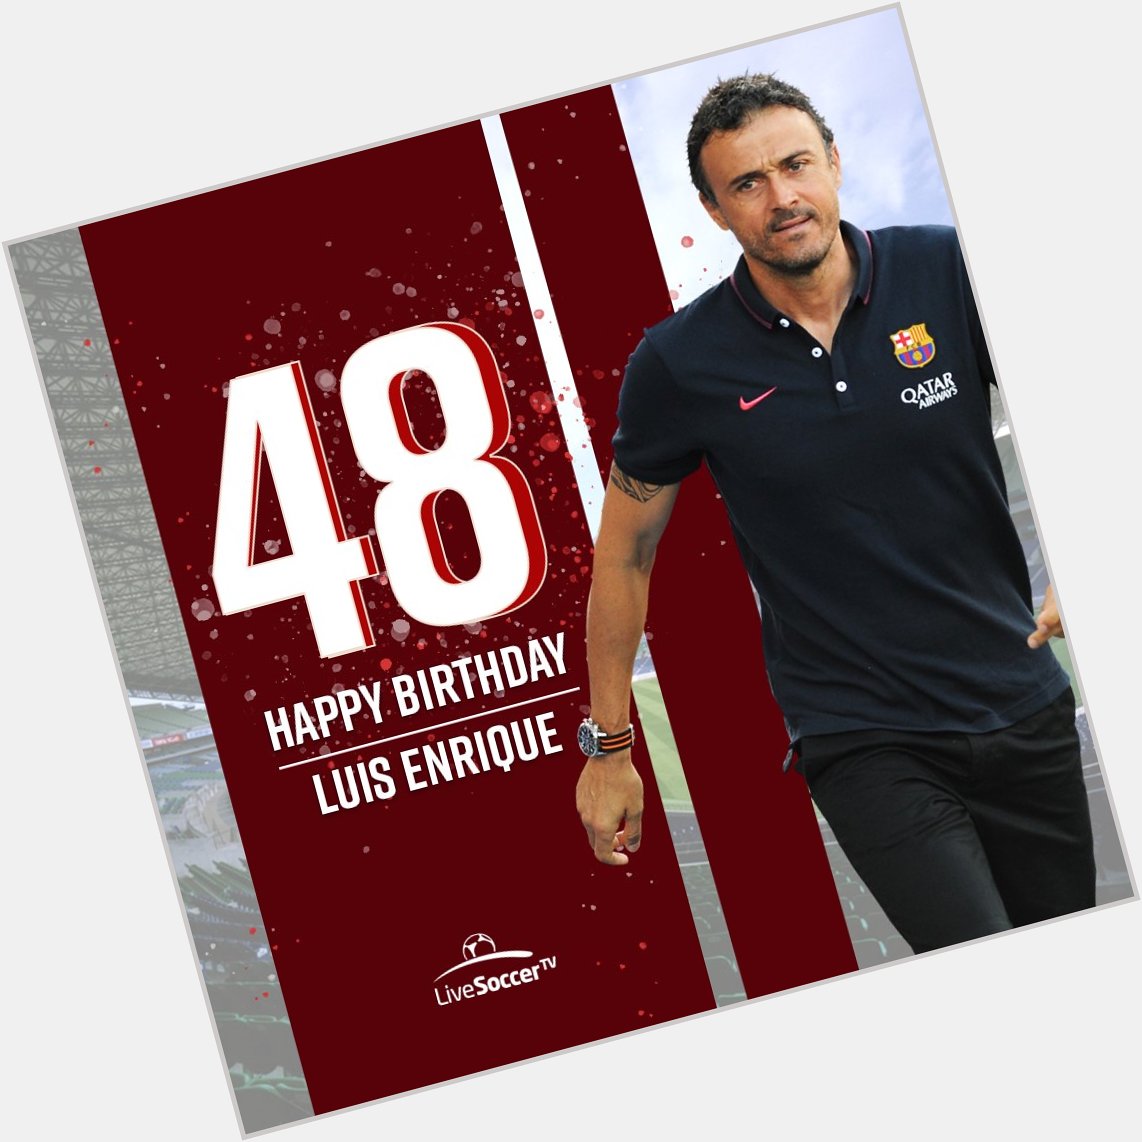 Happy birthday, Luis Enrique  Should he be the next Arsenal or Chelsea manager? 